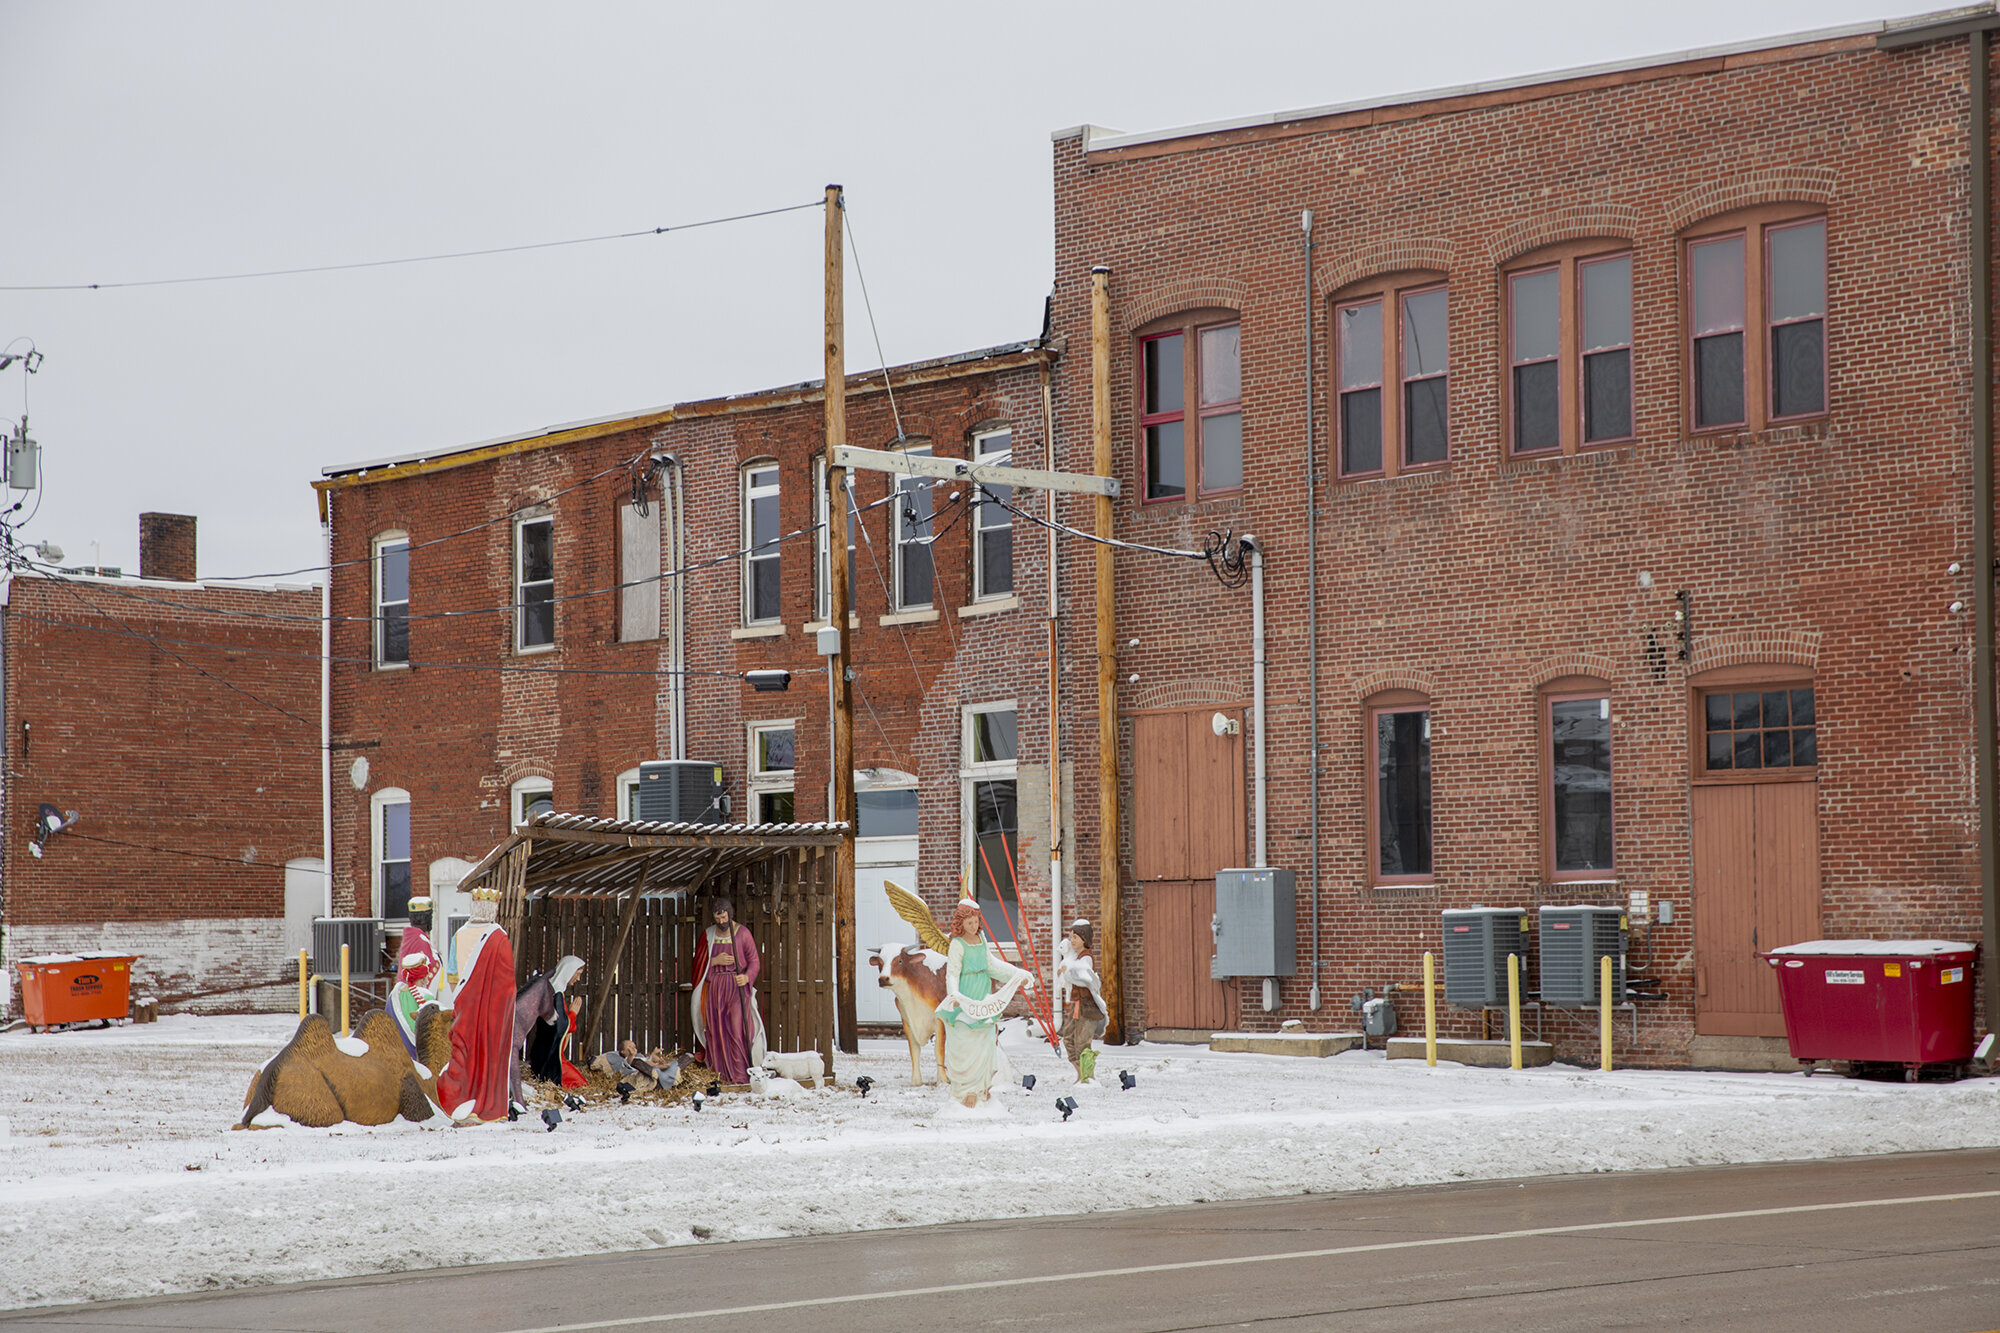  Nativity scene in Centerville. The set caused controversy when it was originally placed on the grounds of the Appanoose County Courthouse. It was later moved to privately-owned property one block away. (Appanoose County) 